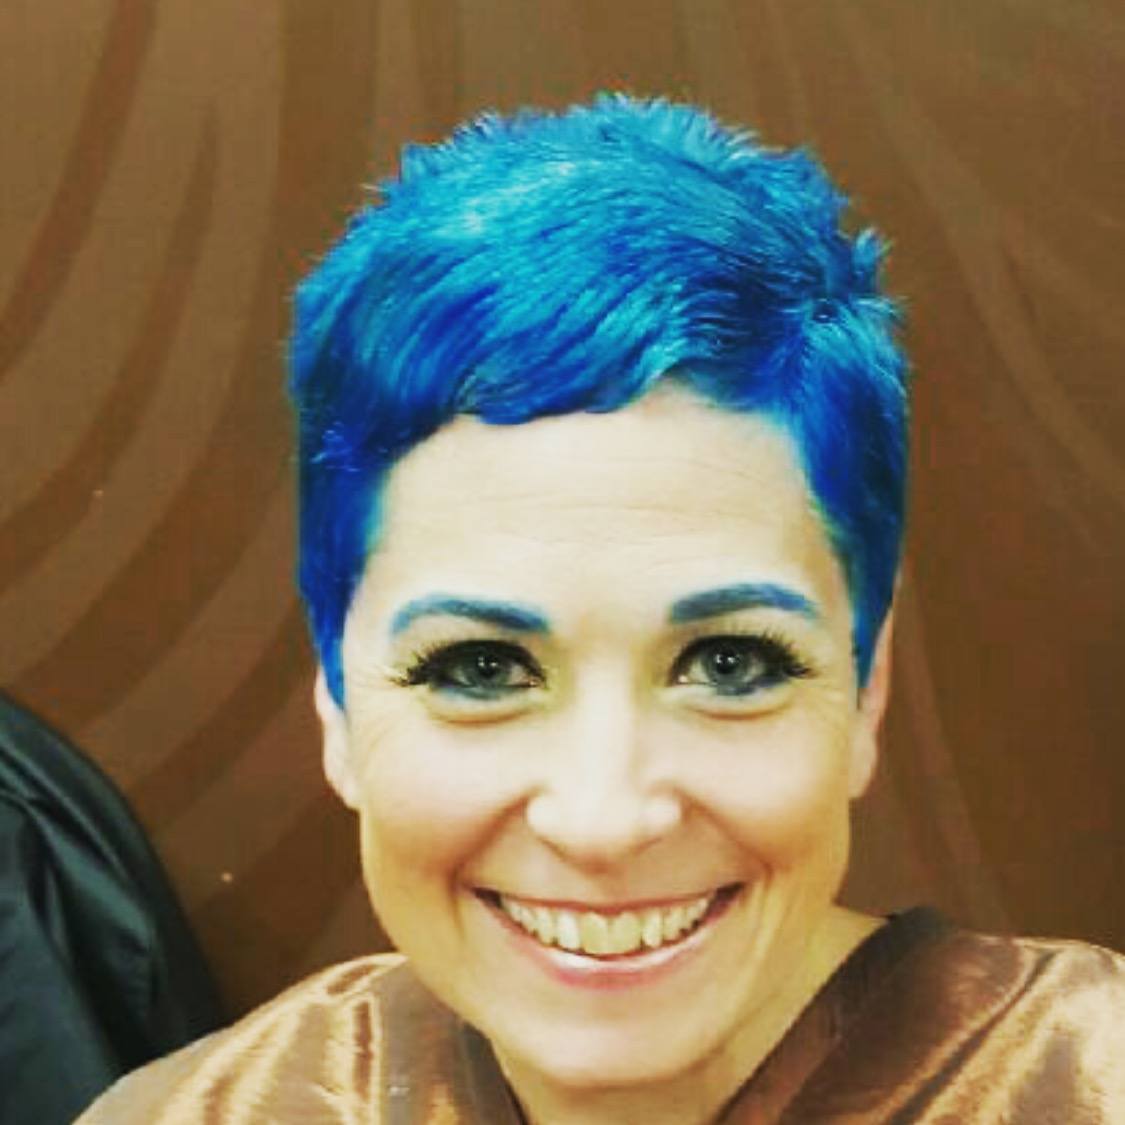 Living life to the fullest: I colored my hair blue!